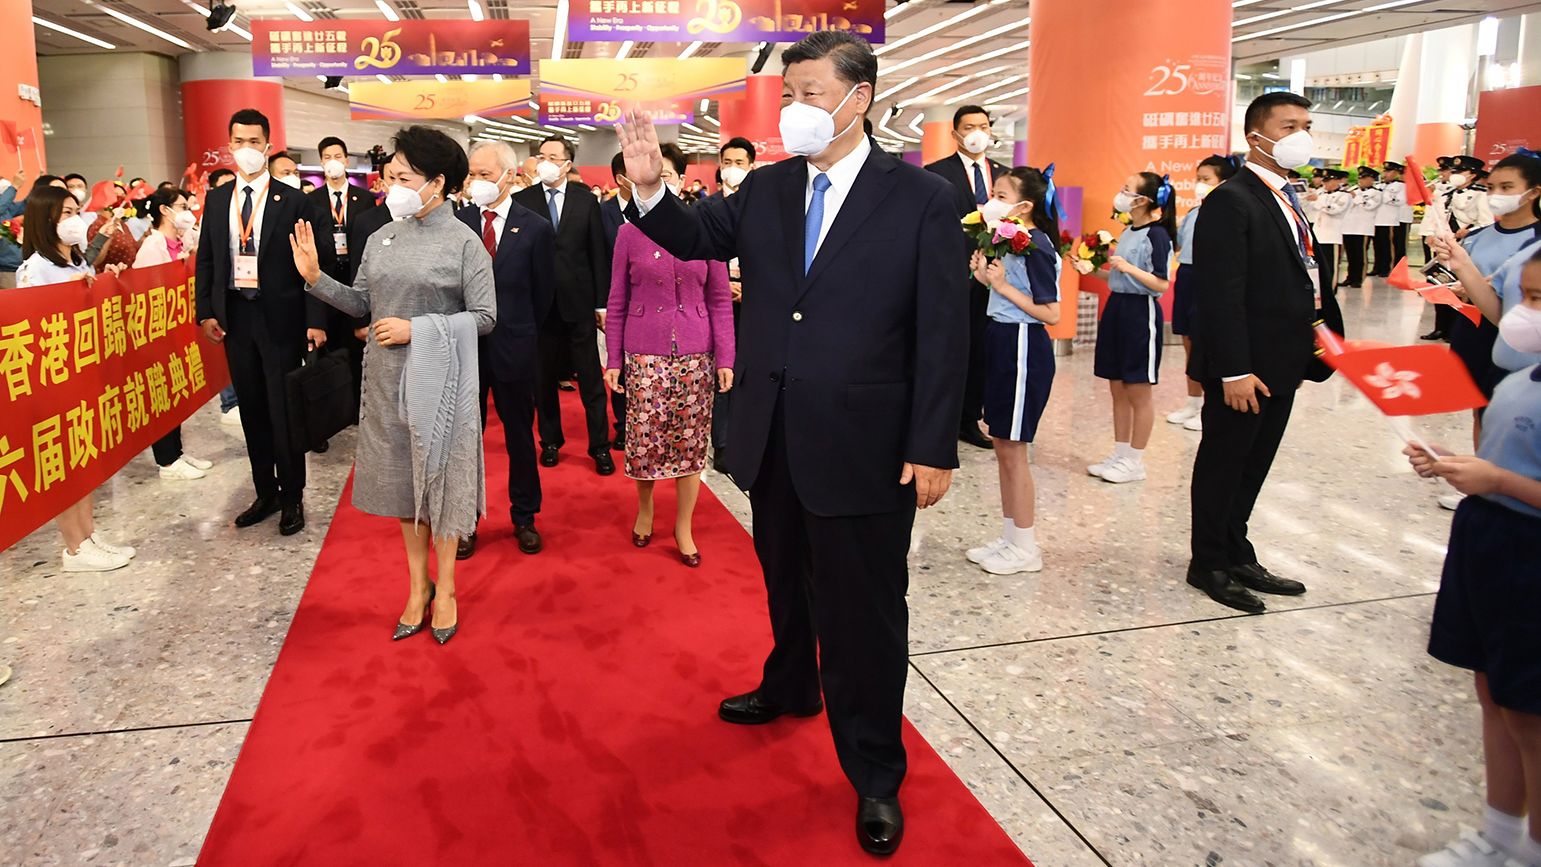 Chinese leader Xi Jinping and his wife Peng Liyuan were greeted by school children on their arrival to Hong Kong on June 30, 2022.